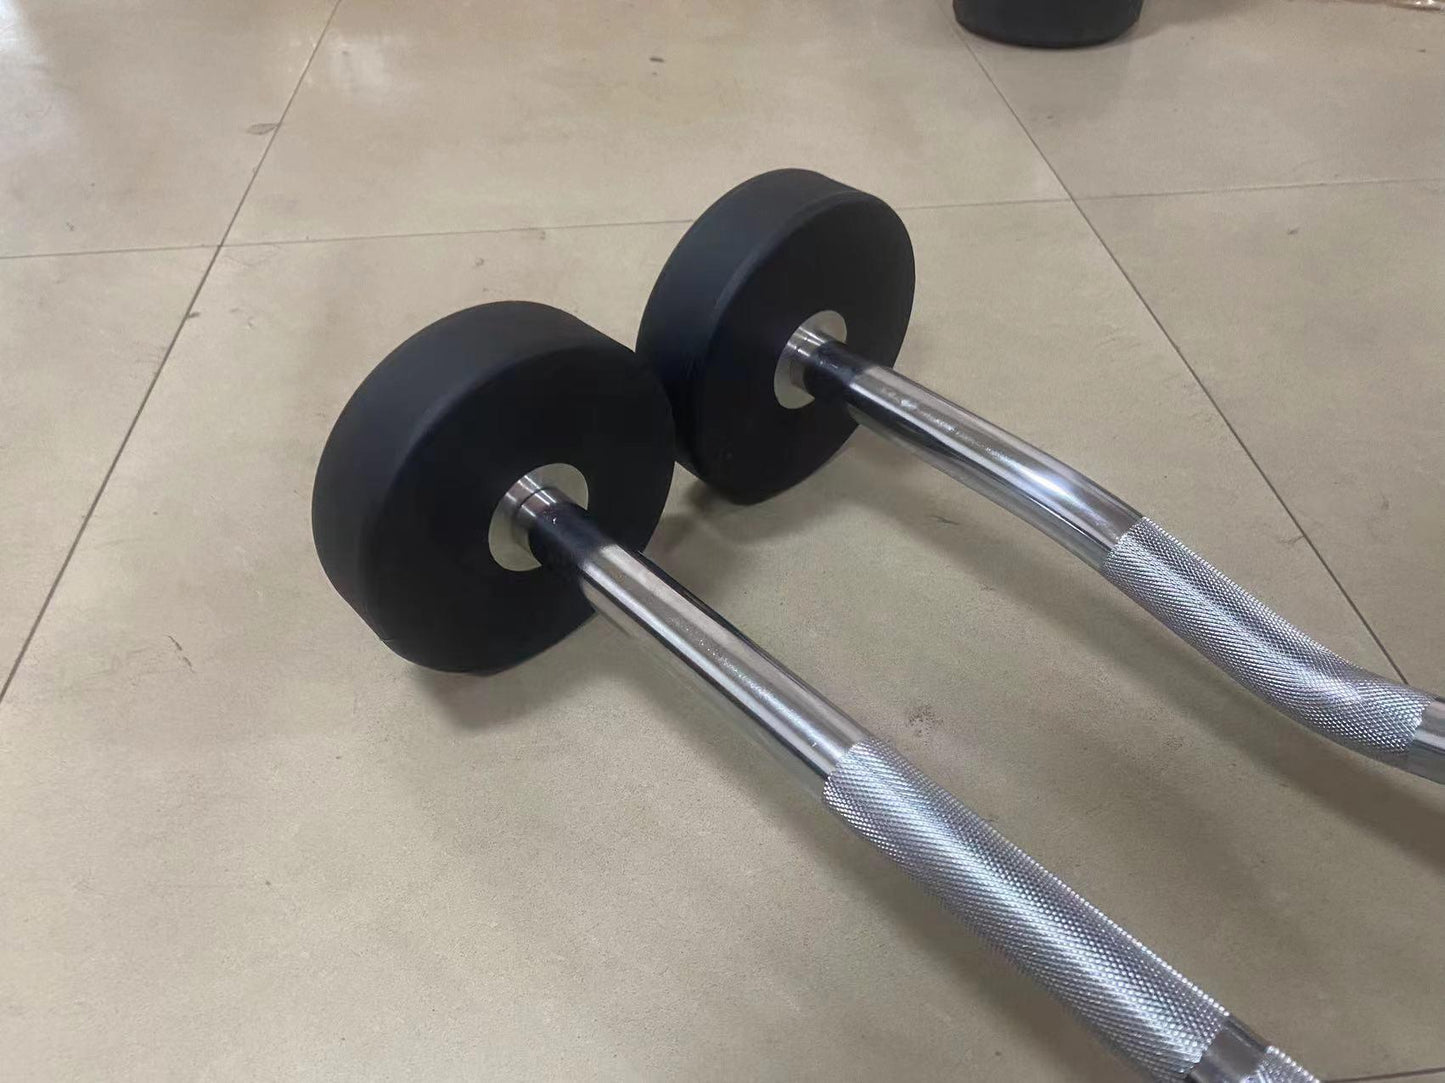 Muscle D Barbell Set with Racks